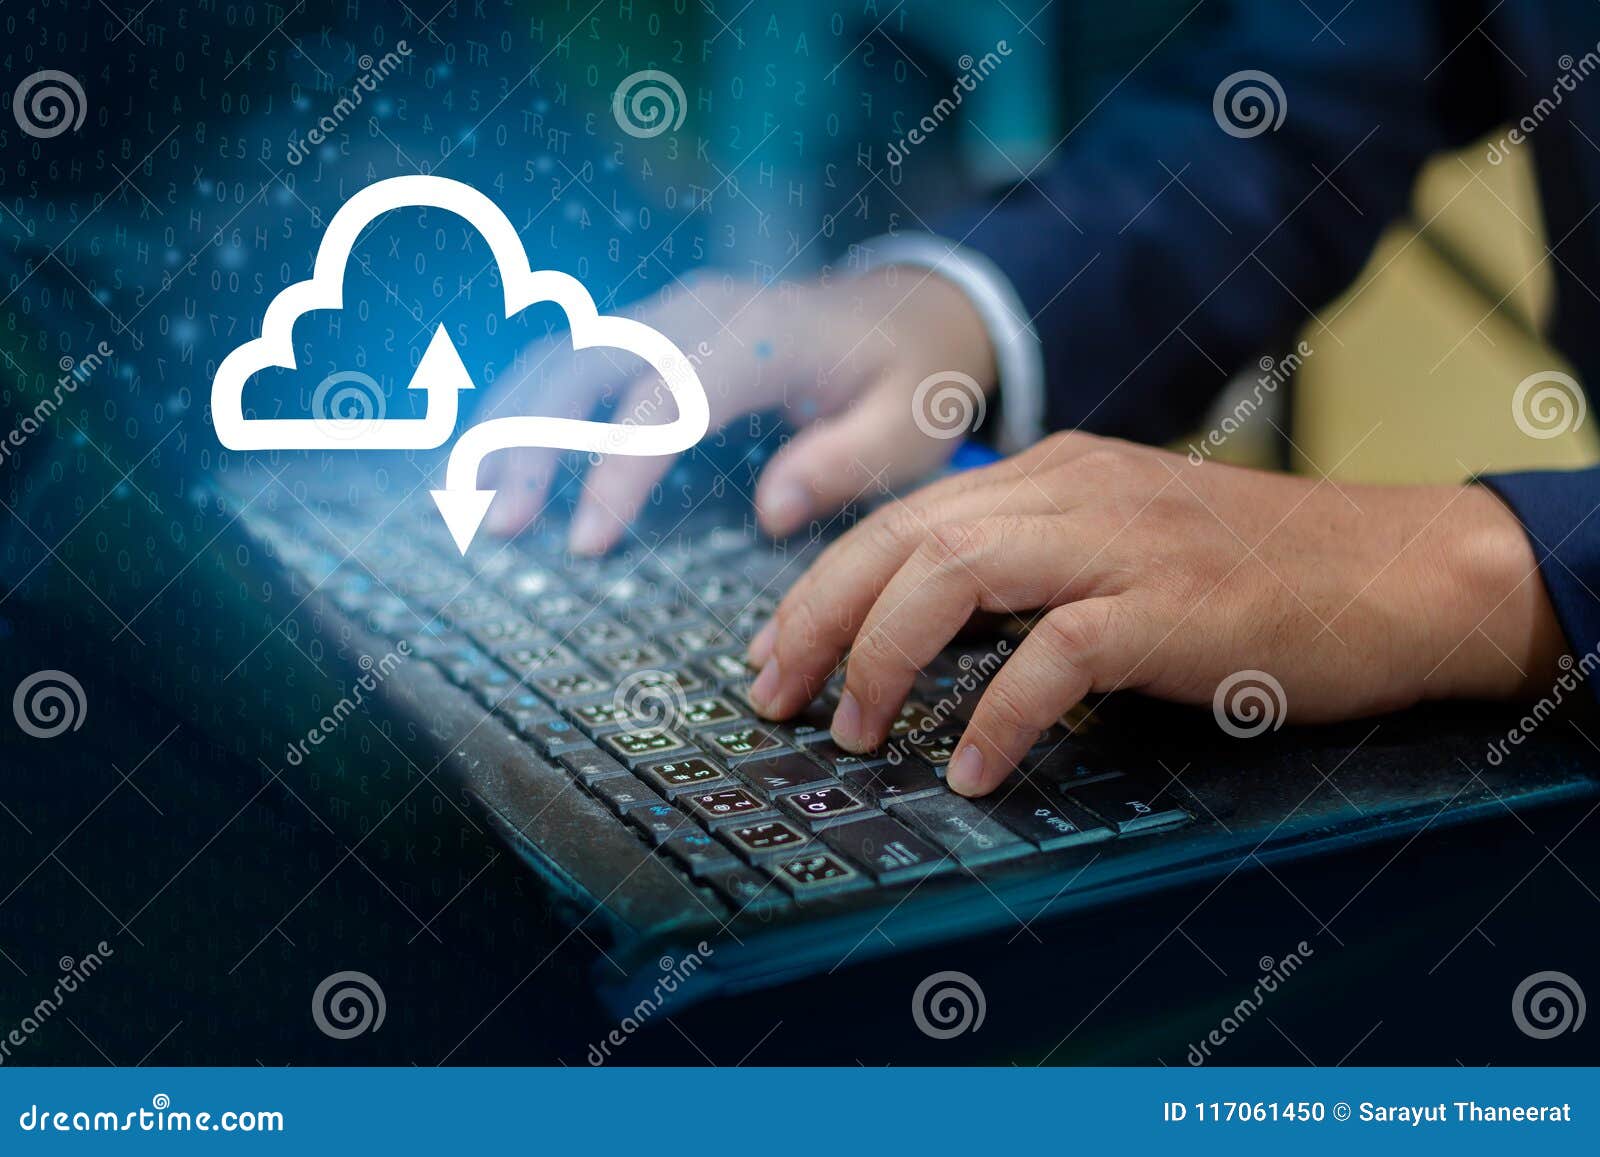 hand print keyboard press enter button on the computer hand businessman connect cloud collect data cloud computing concept busing